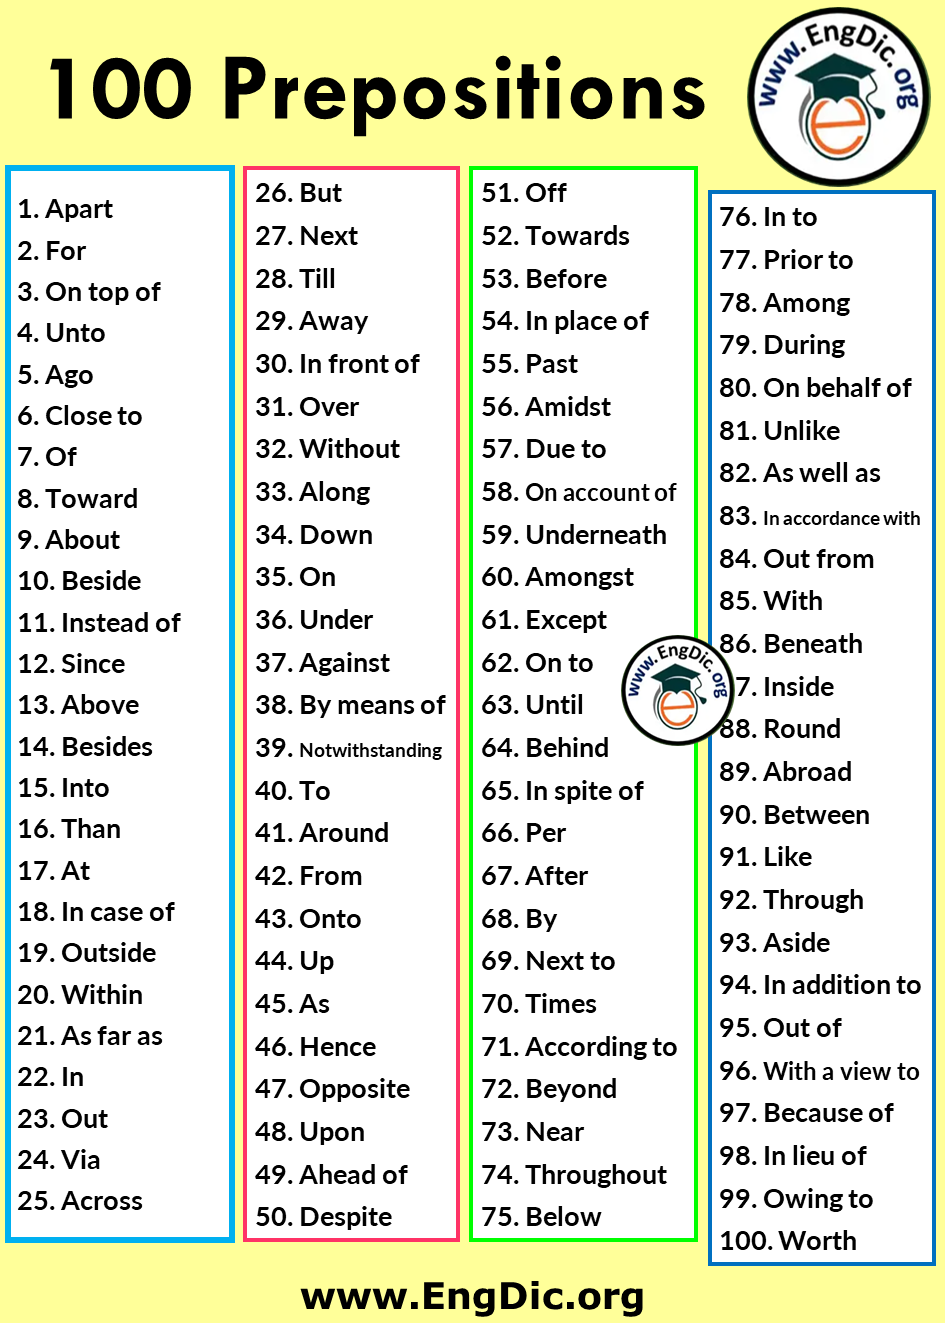 100 Important Preposition List and Using Example Sentences - EngDic